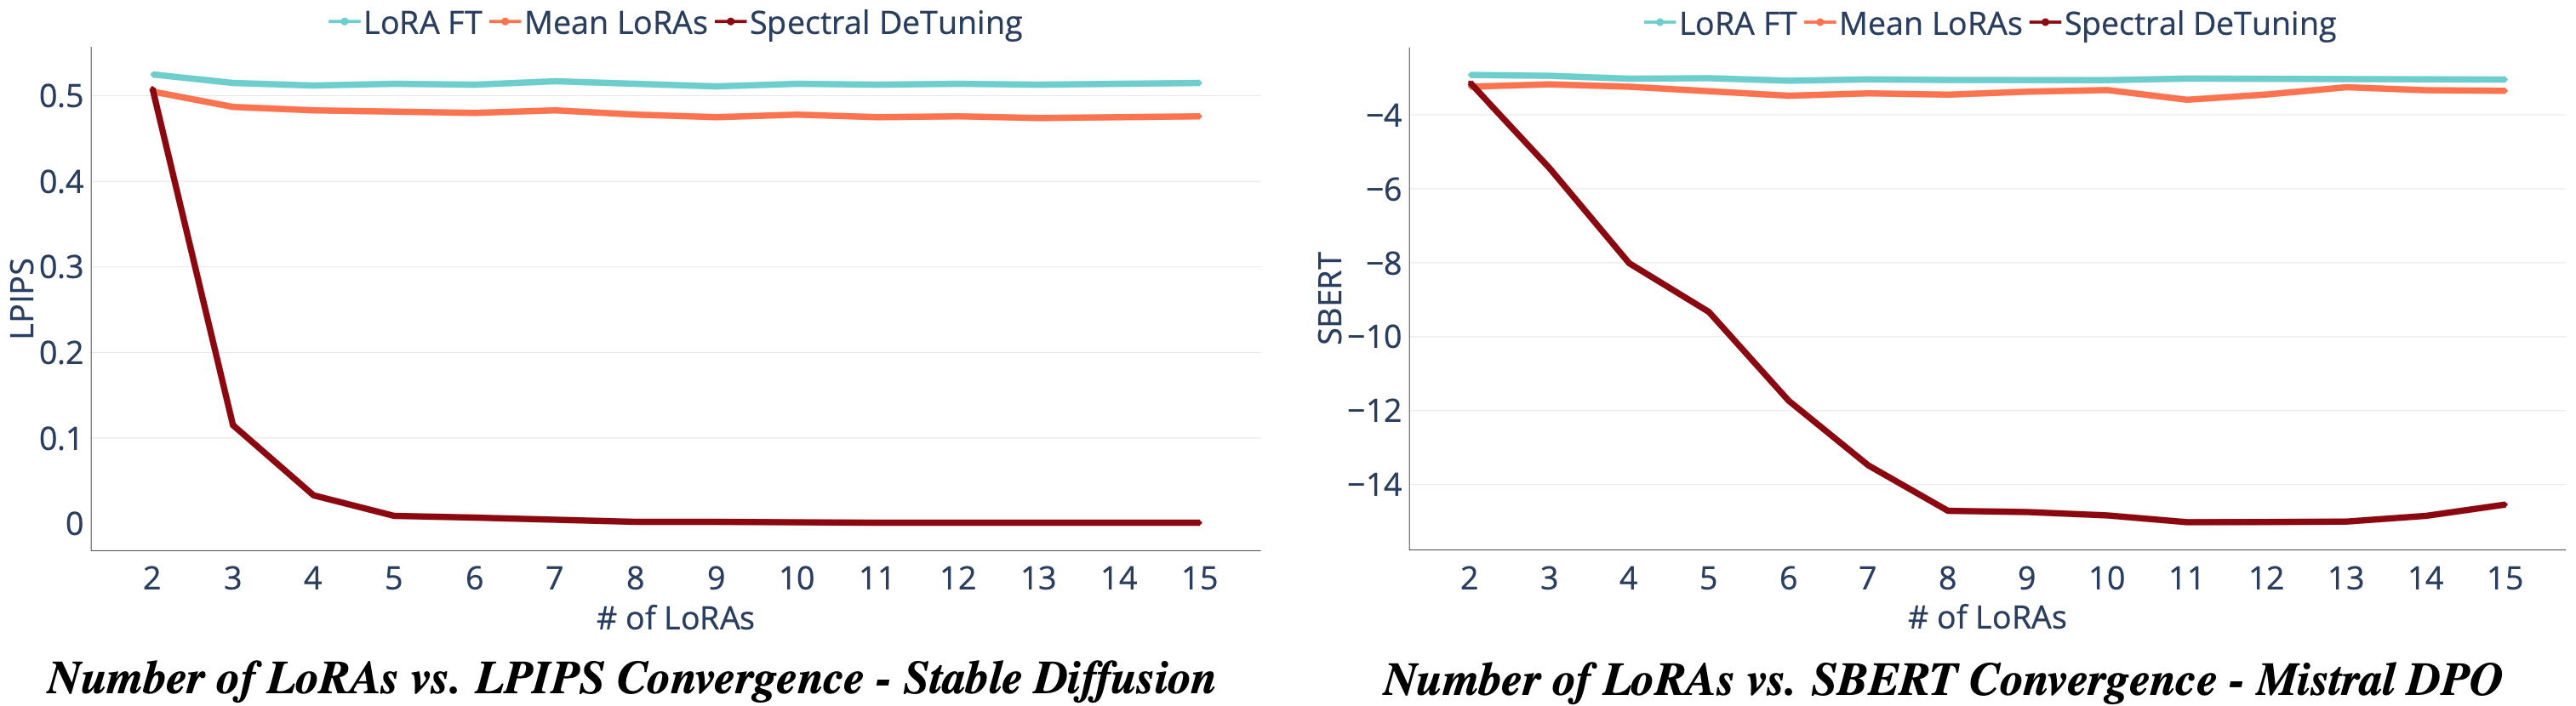 Number of LoRAs for semantic convergence